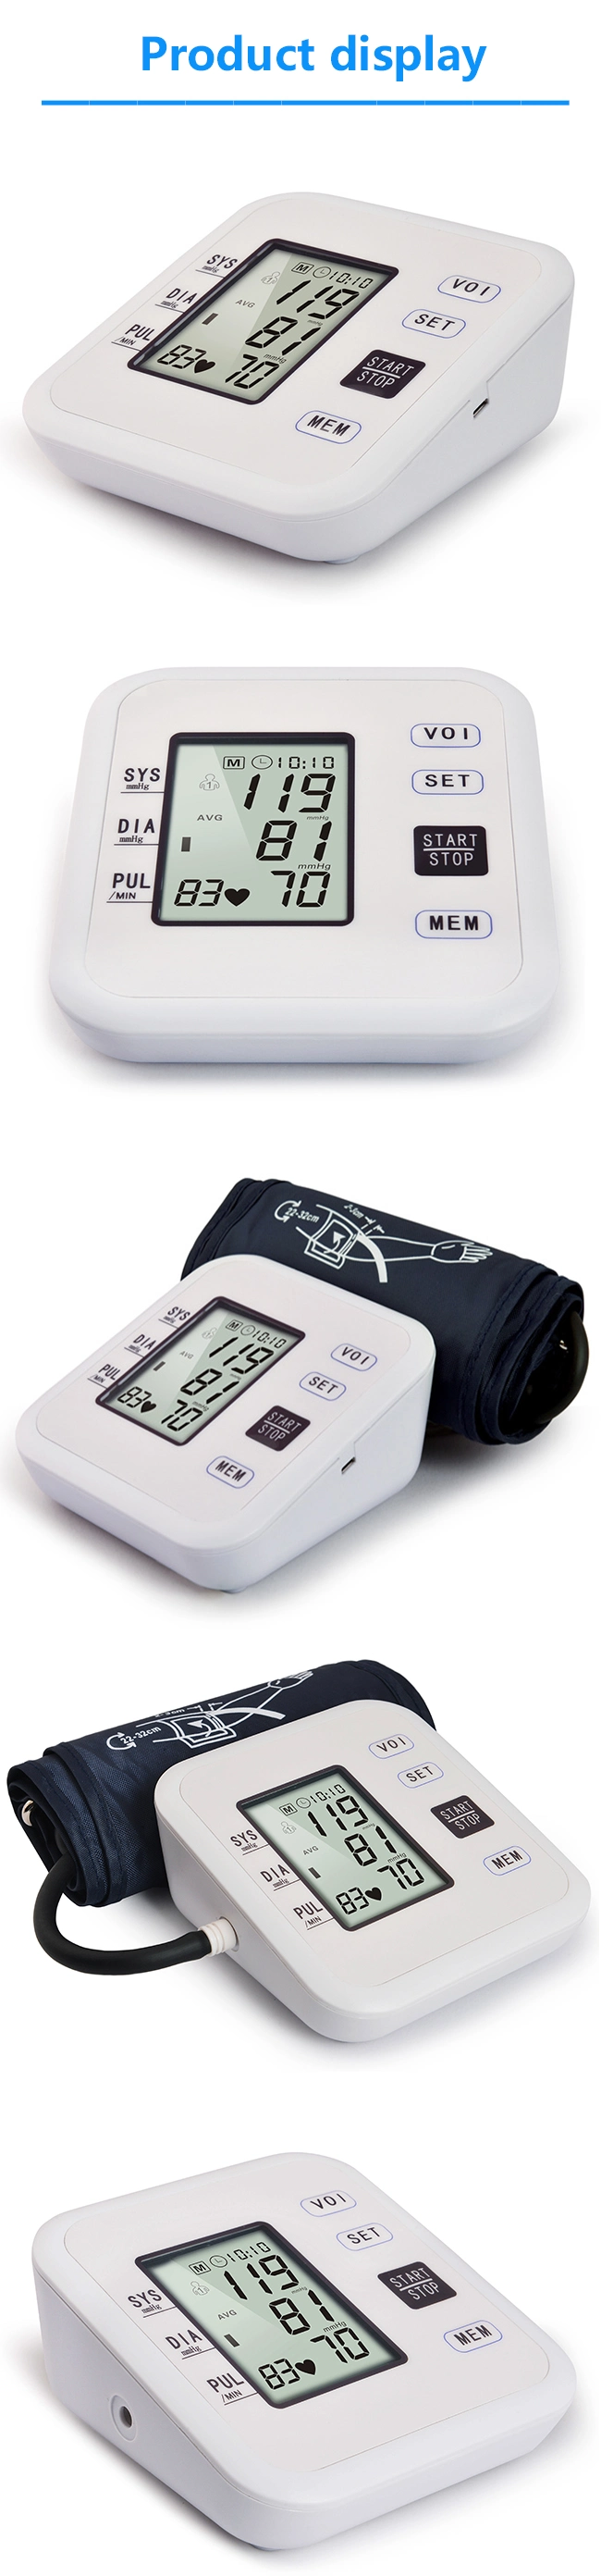 Ce, ISO, FDA Certified Oscillometric Blood Pressure Monitor, Bpm, Electronic Blood Pressure Meter and Gauge